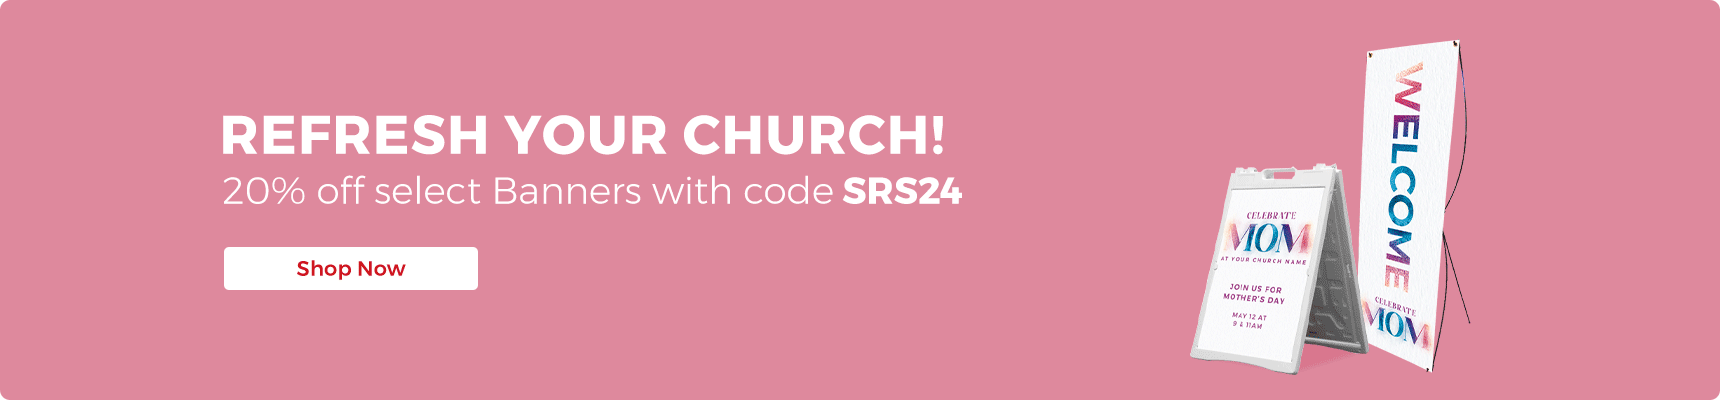 20% Off with code SRS24